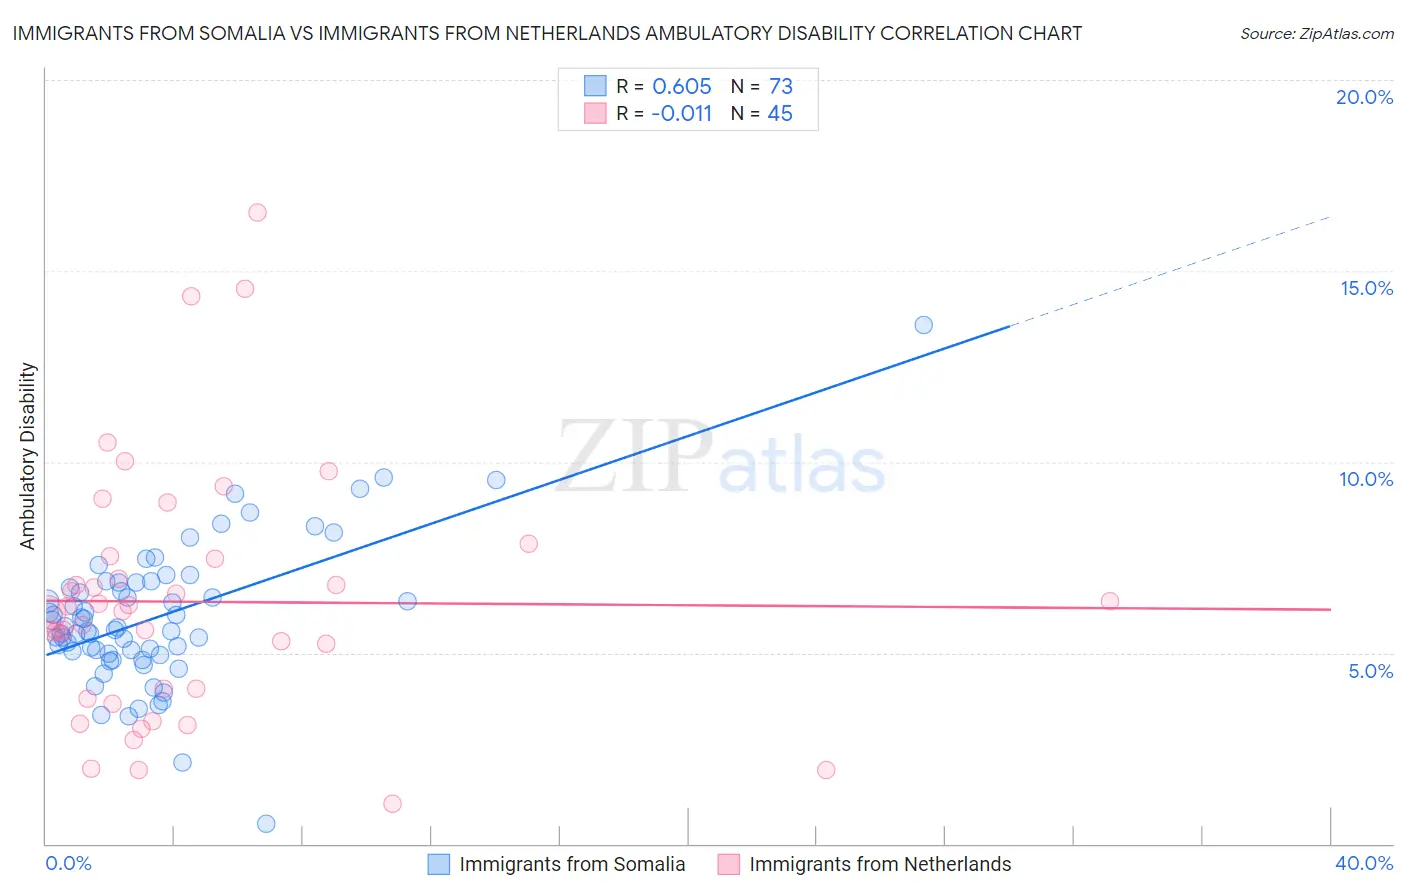 Immigrants from Somalia vs Immigrants from Netherlands Ambulatory Disability